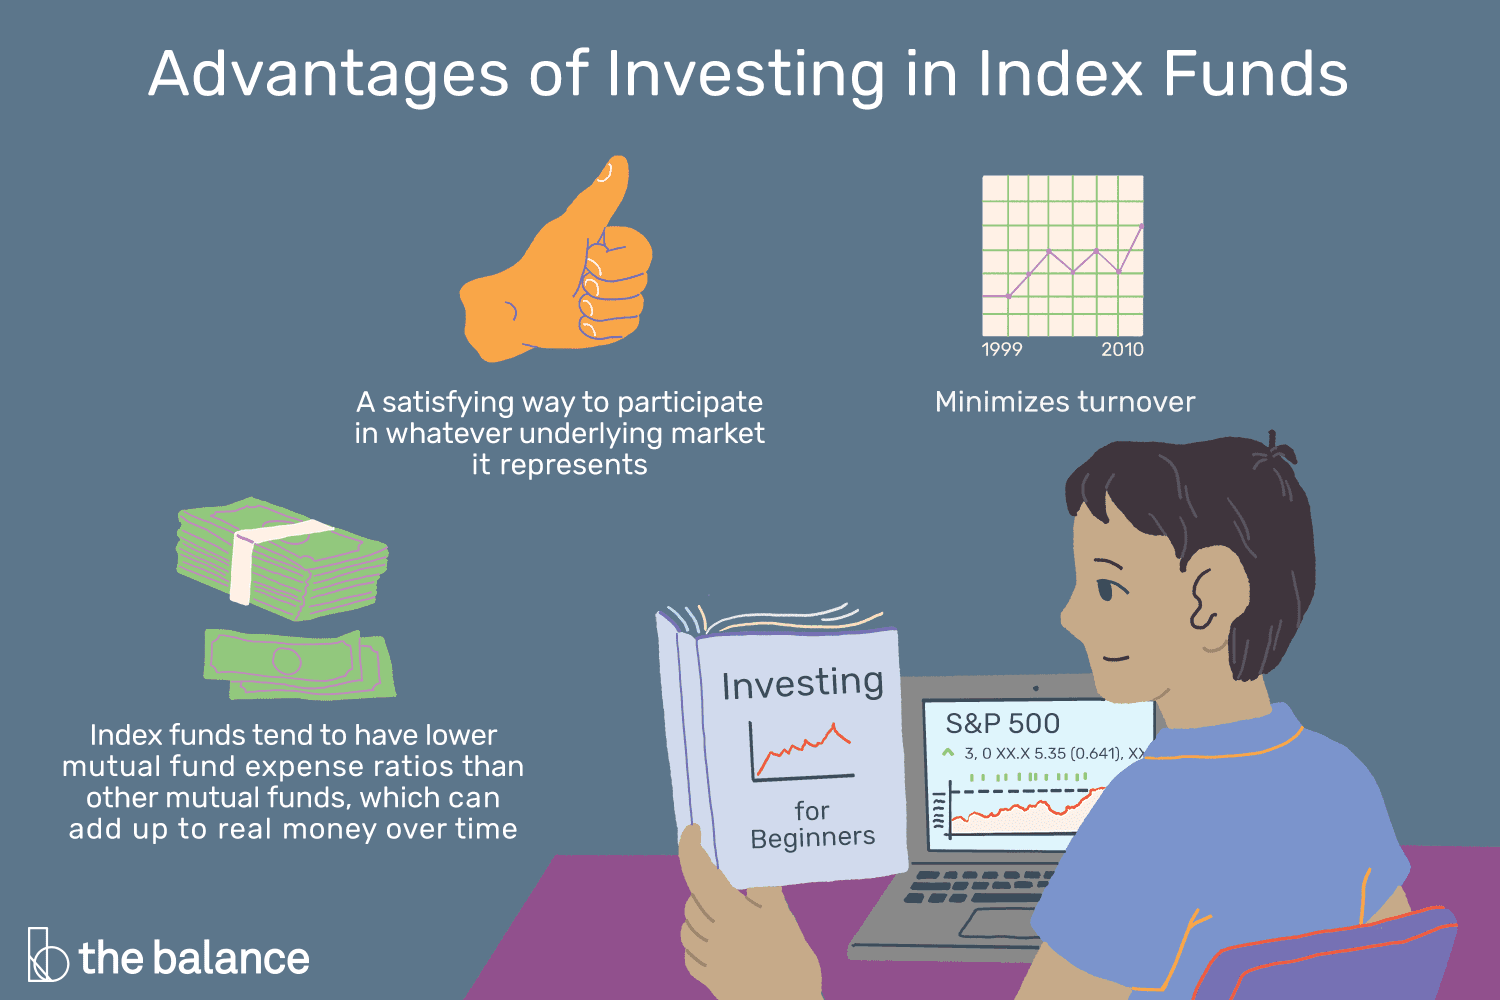 Investing in Index Funds for Beginners